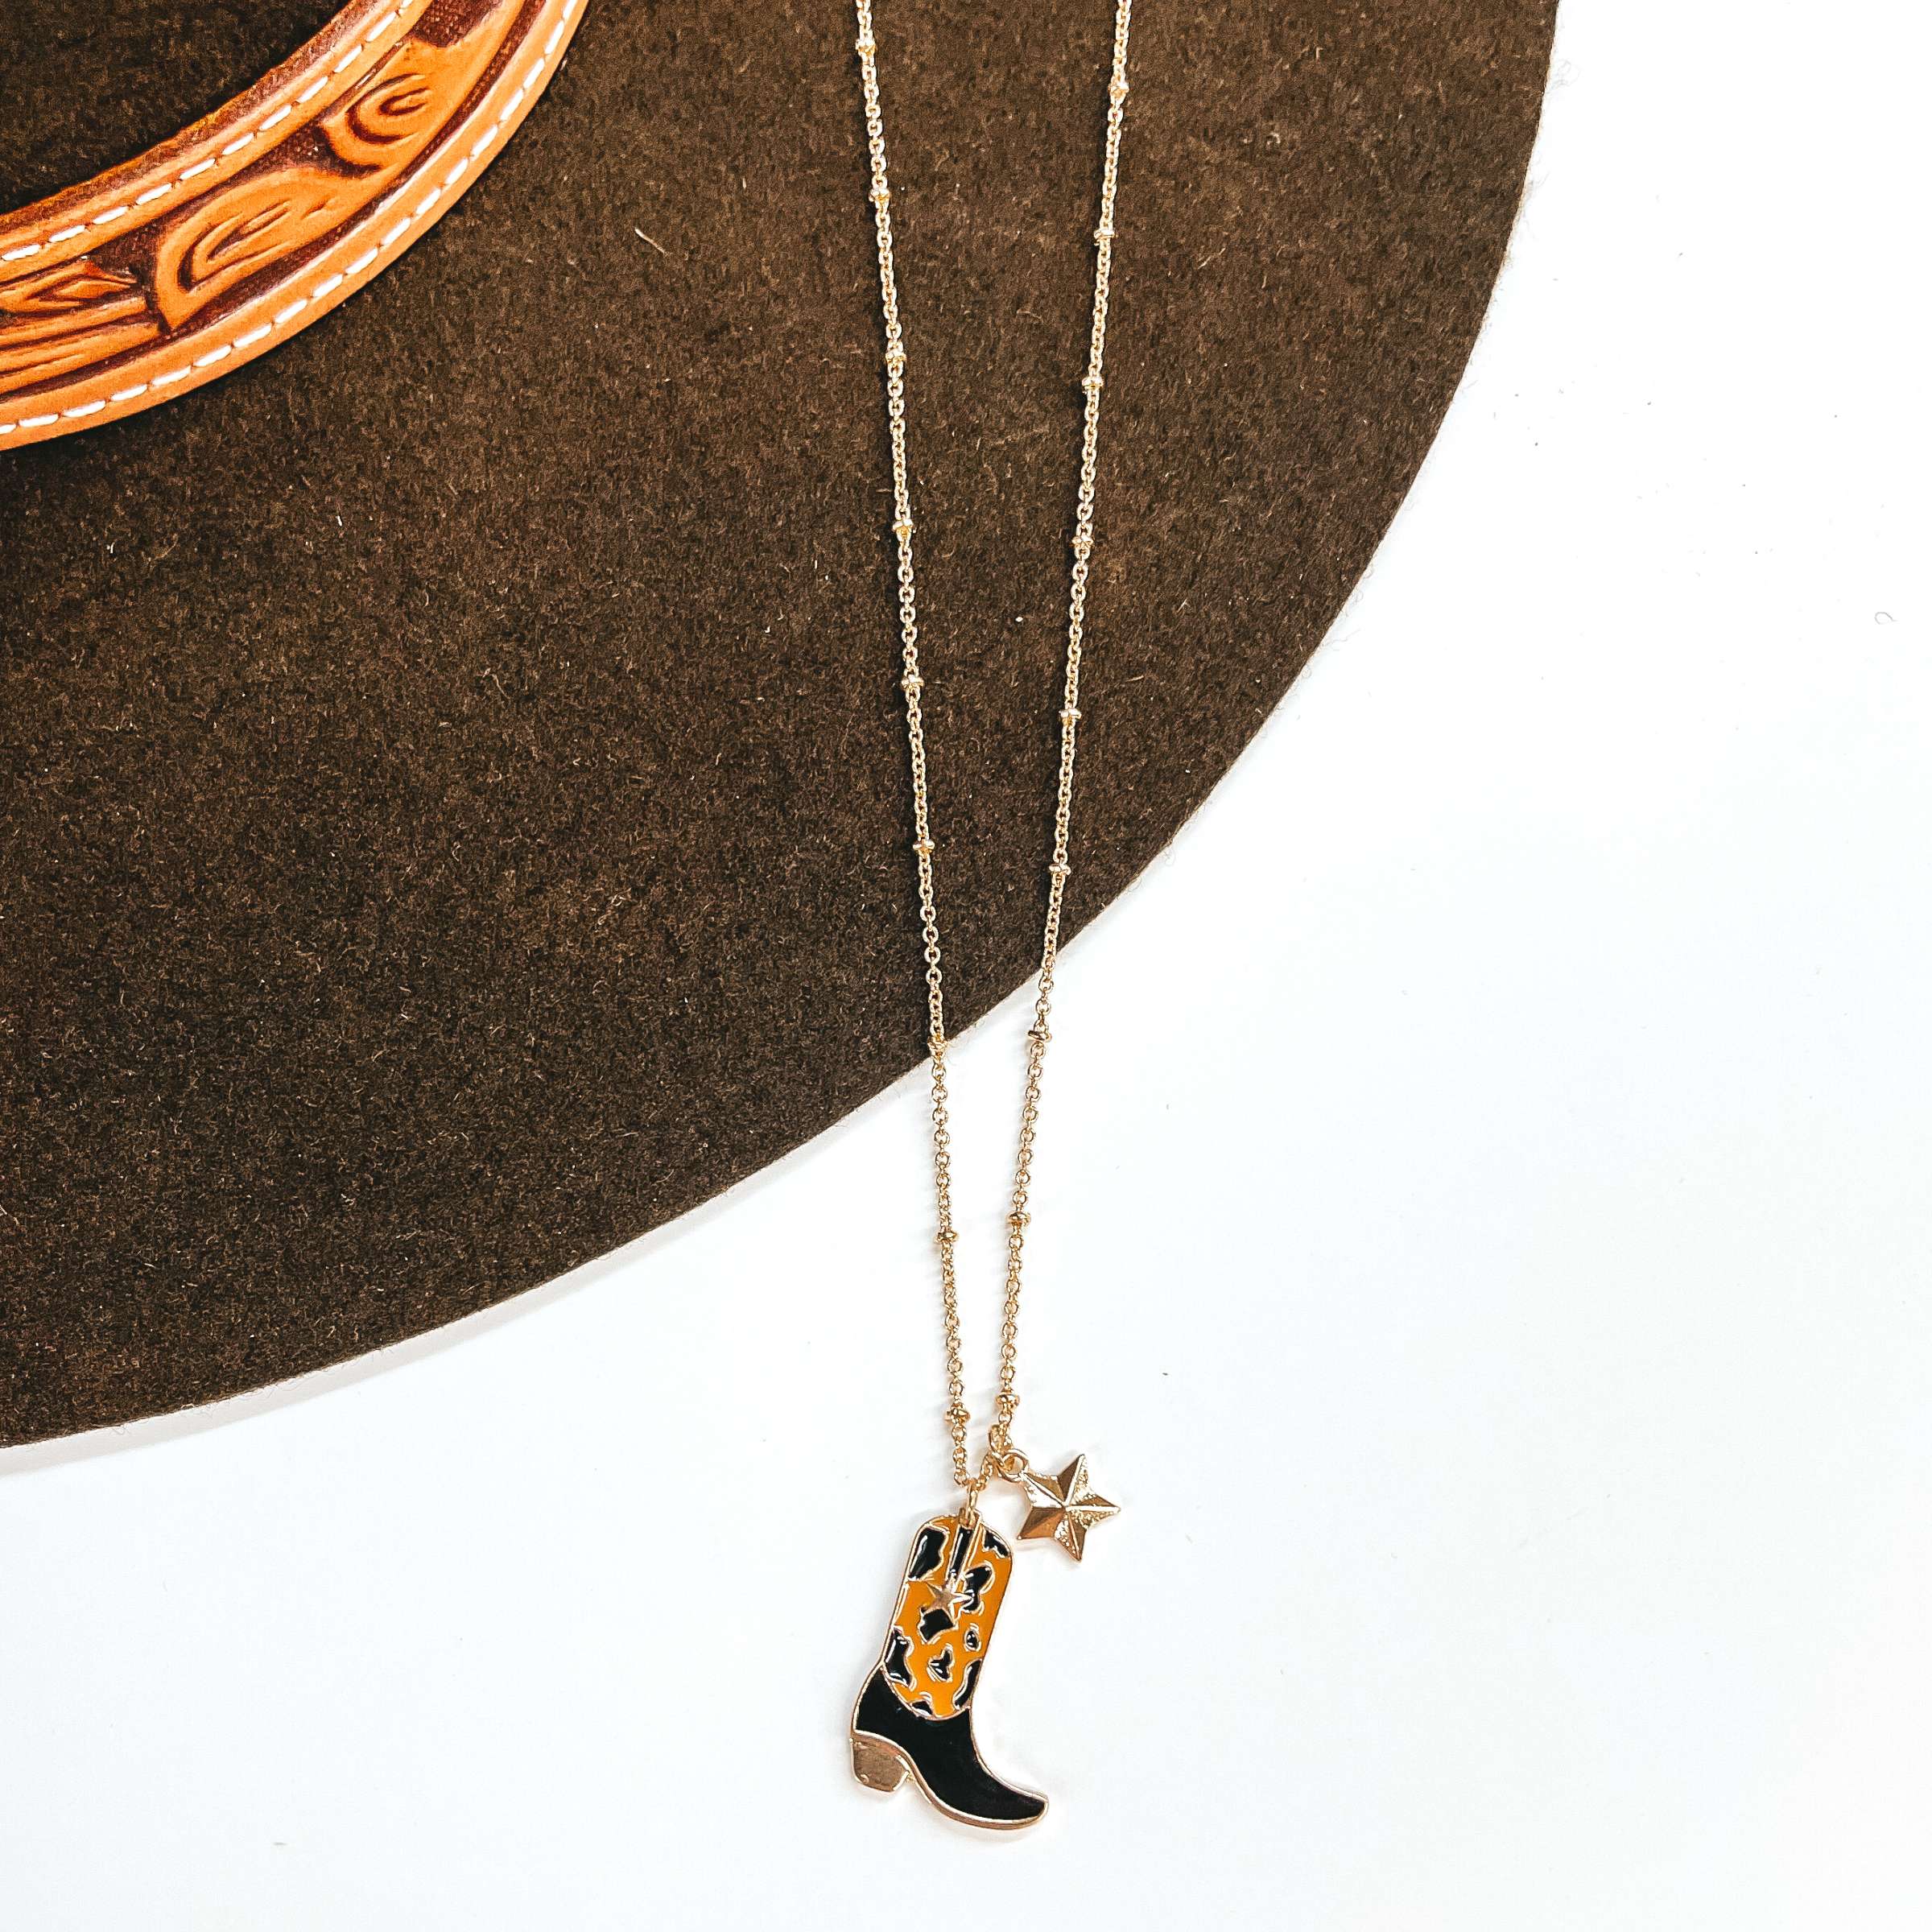 Kick Your Boots Up Gold Necklace with Cow Print Boot Pendant in Brown and Black - Giddy Up Glamour Boutique